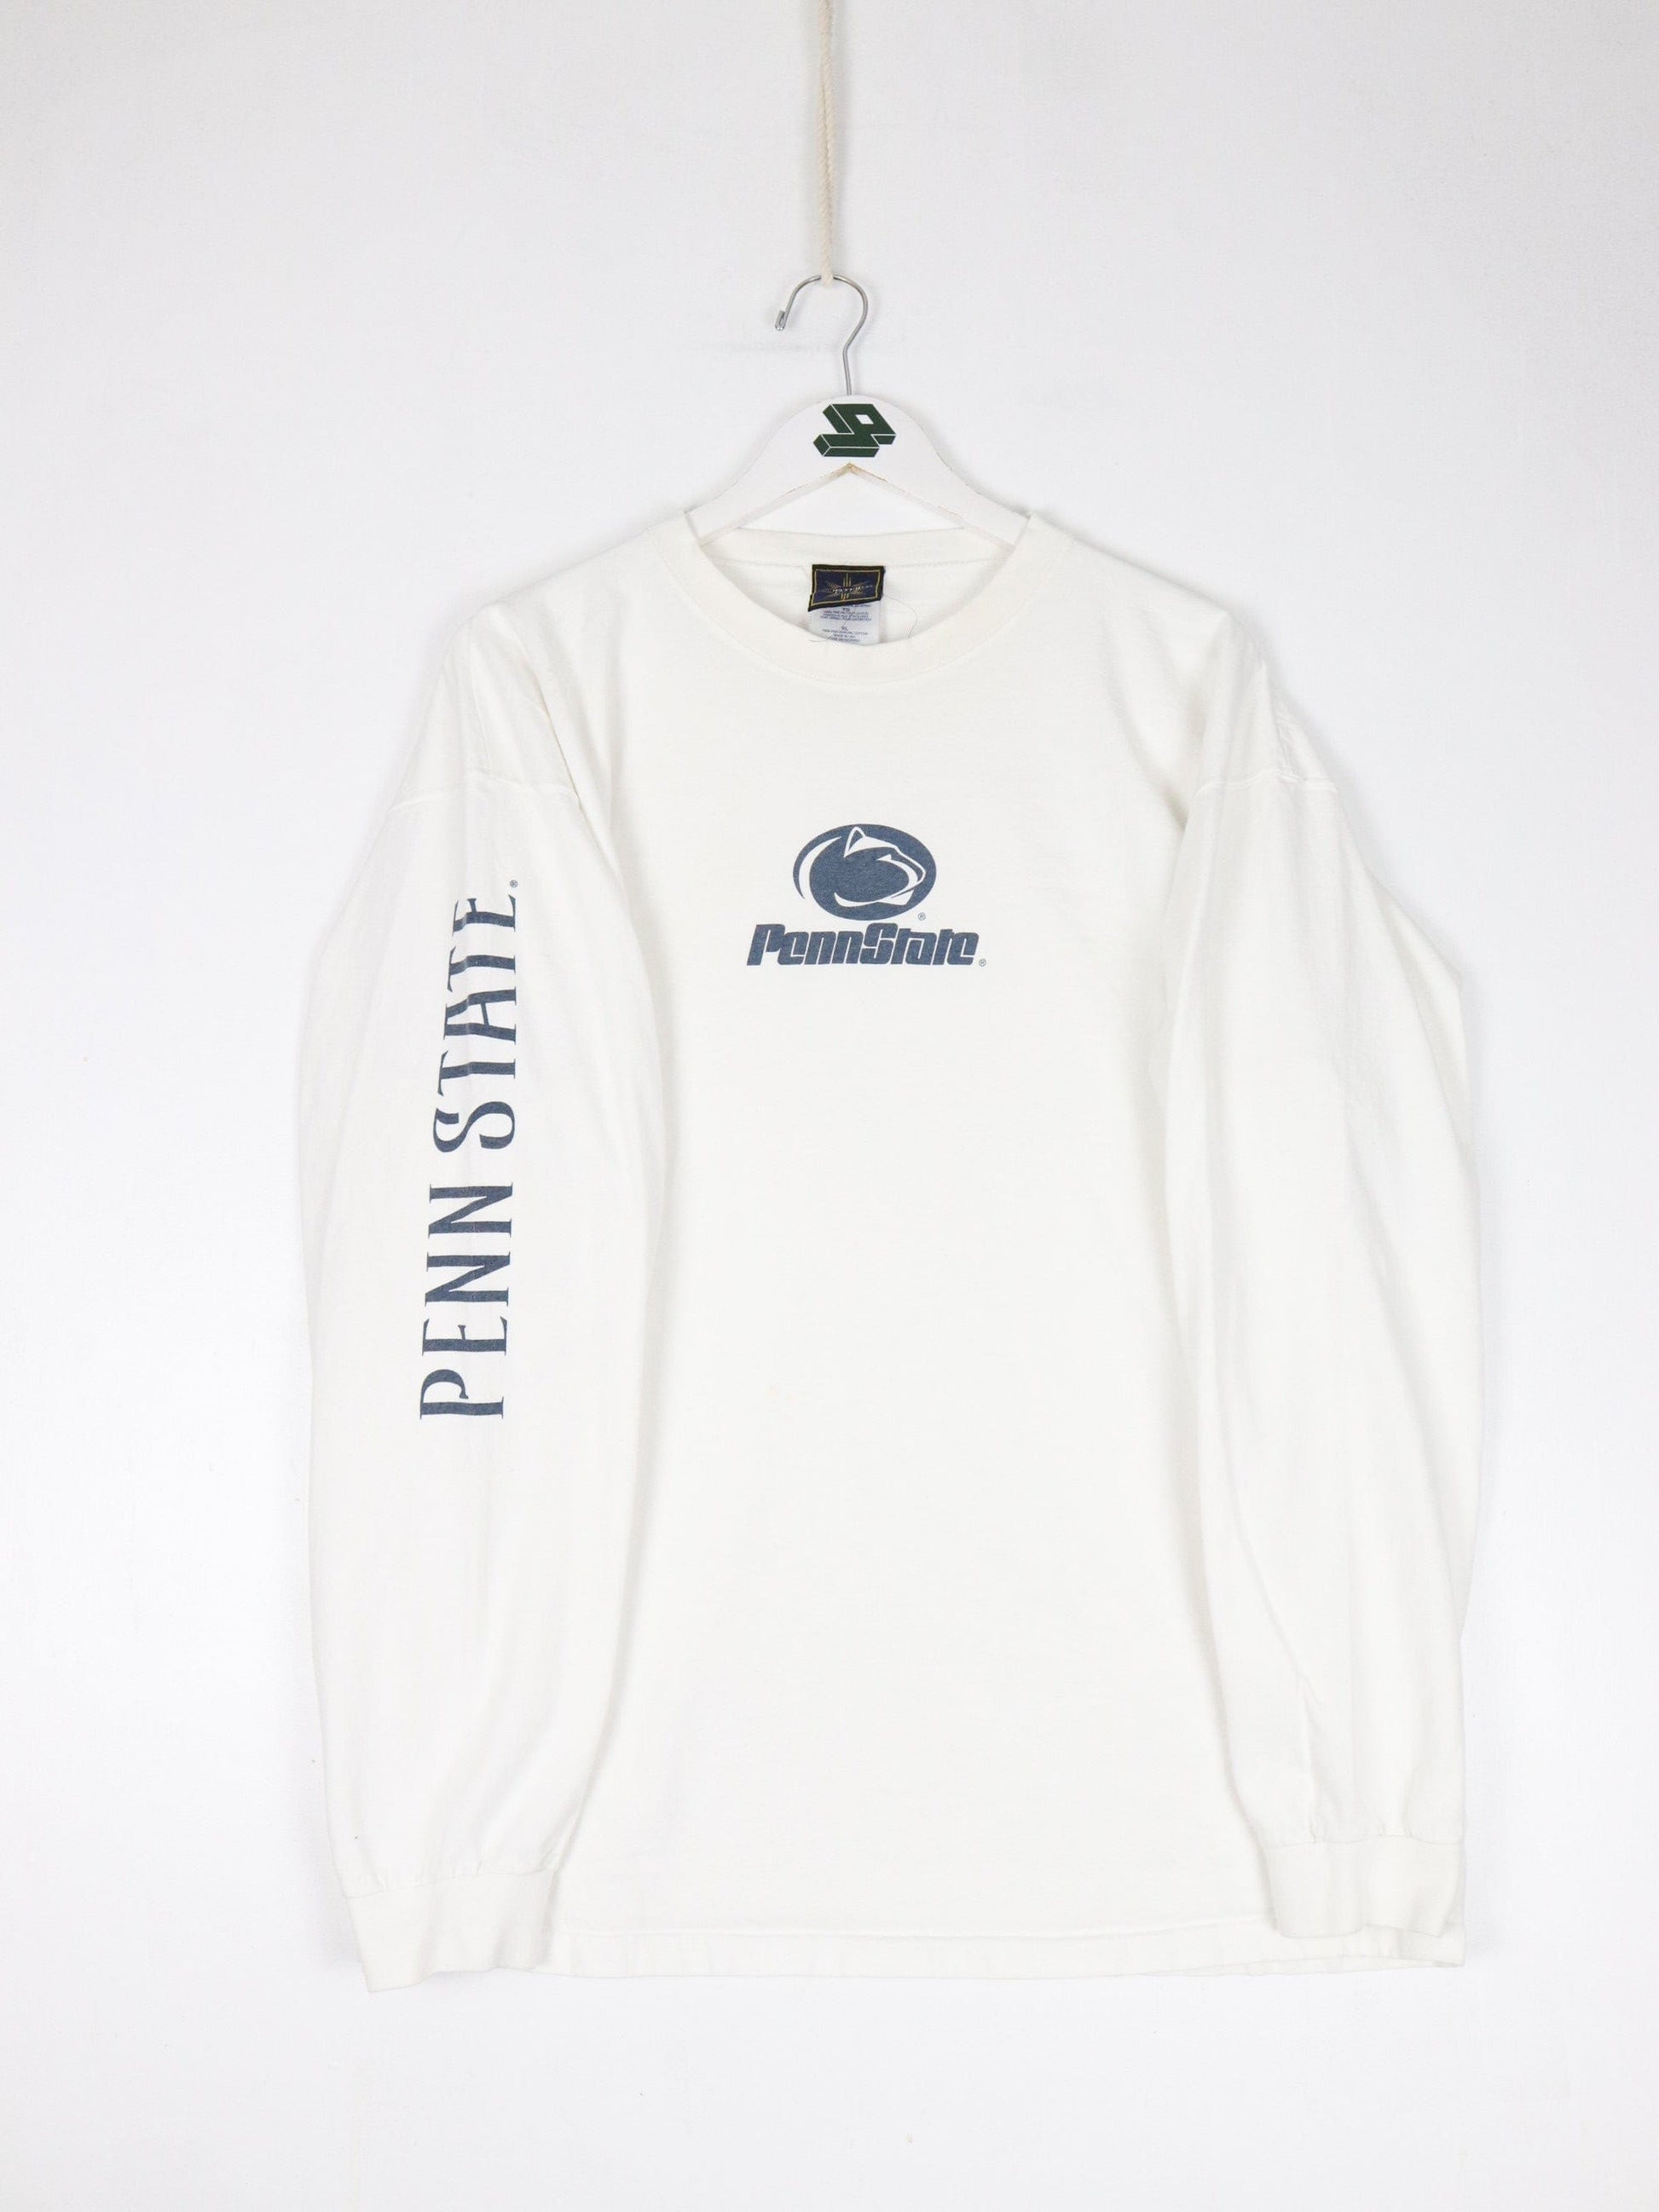 Other T-Shirts & Tank Tops Vintage Penn State Nittany Lions T Shirt Mens XL White Long Sleeve College